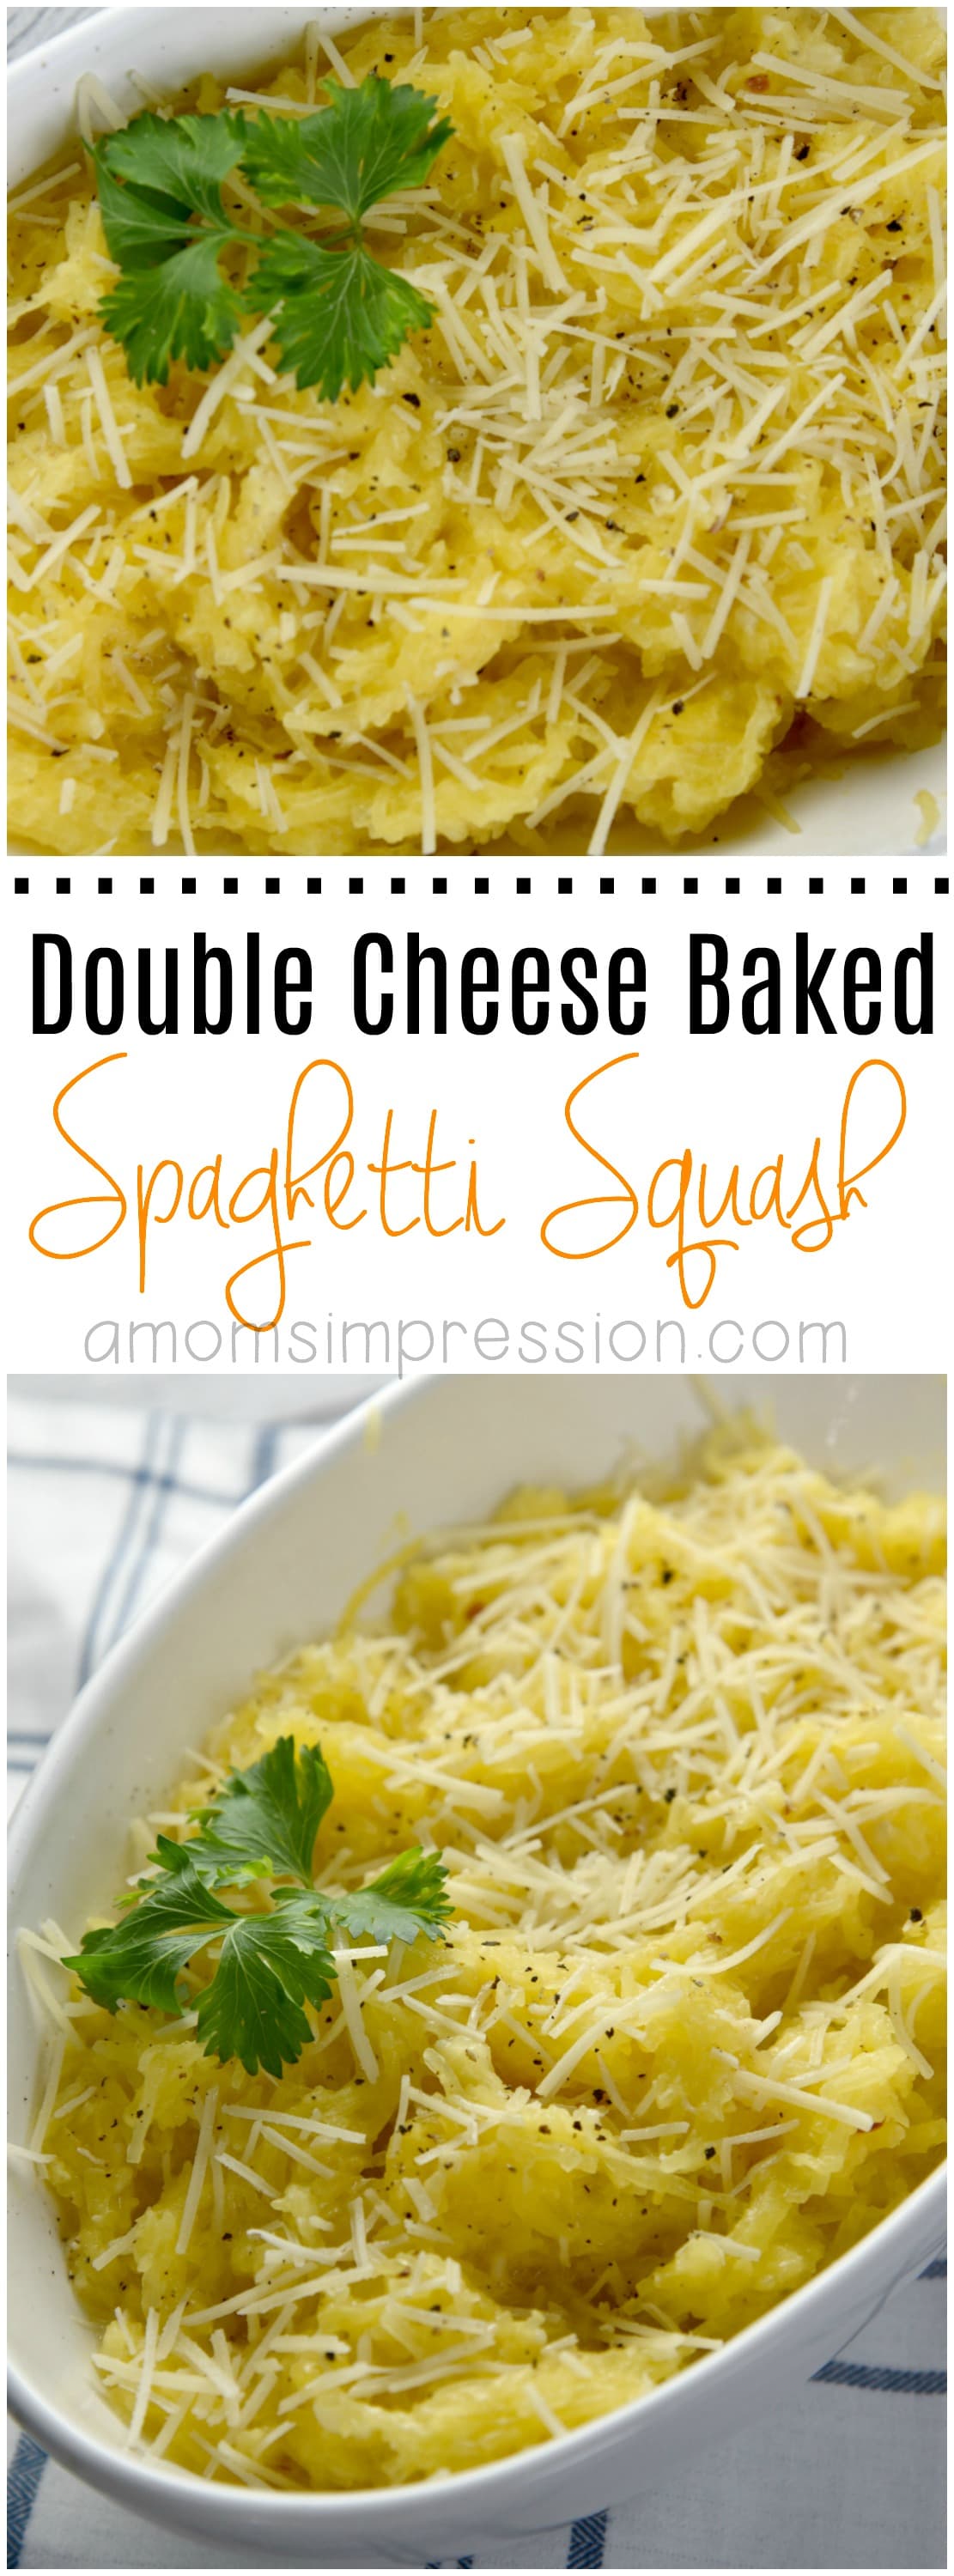 Baked Spaghetti Squash is a nice healthy alternative to pasta. This easy side dish is made with fontina and asiago cheeses making it a delicious vegetarian dinner idea and budget friendly. #ad